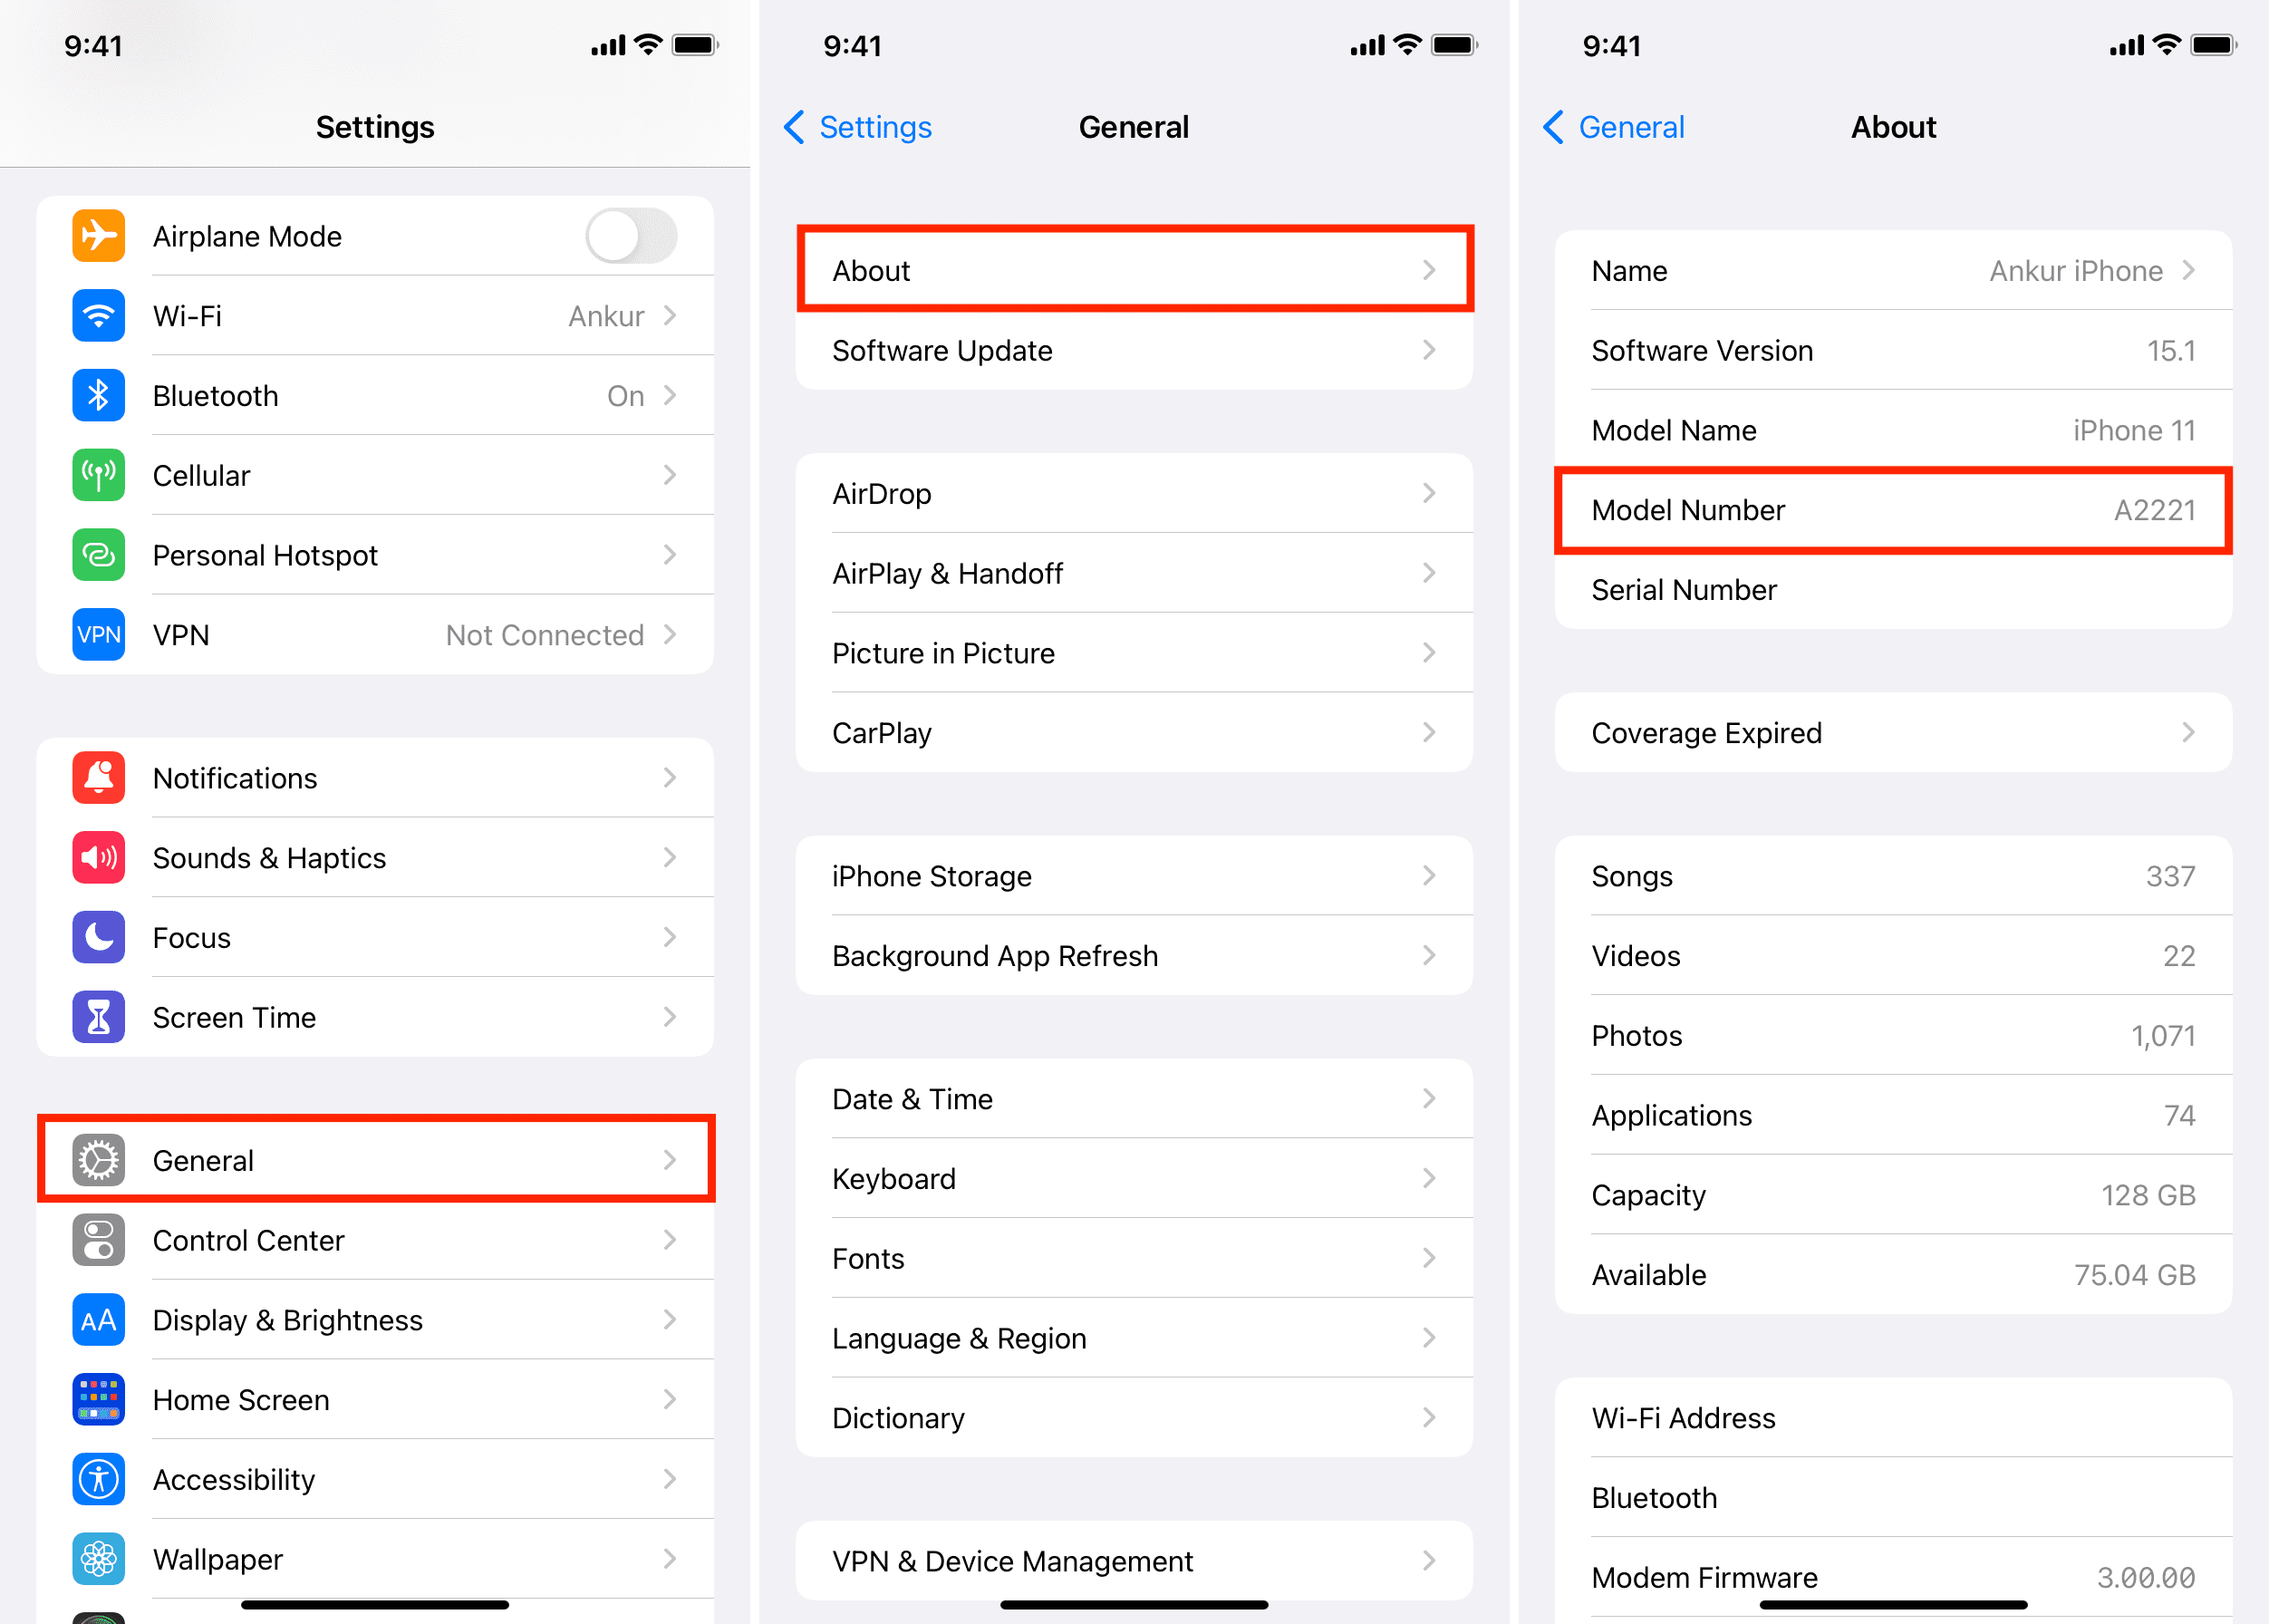 How to see iPhone model number in Settings app